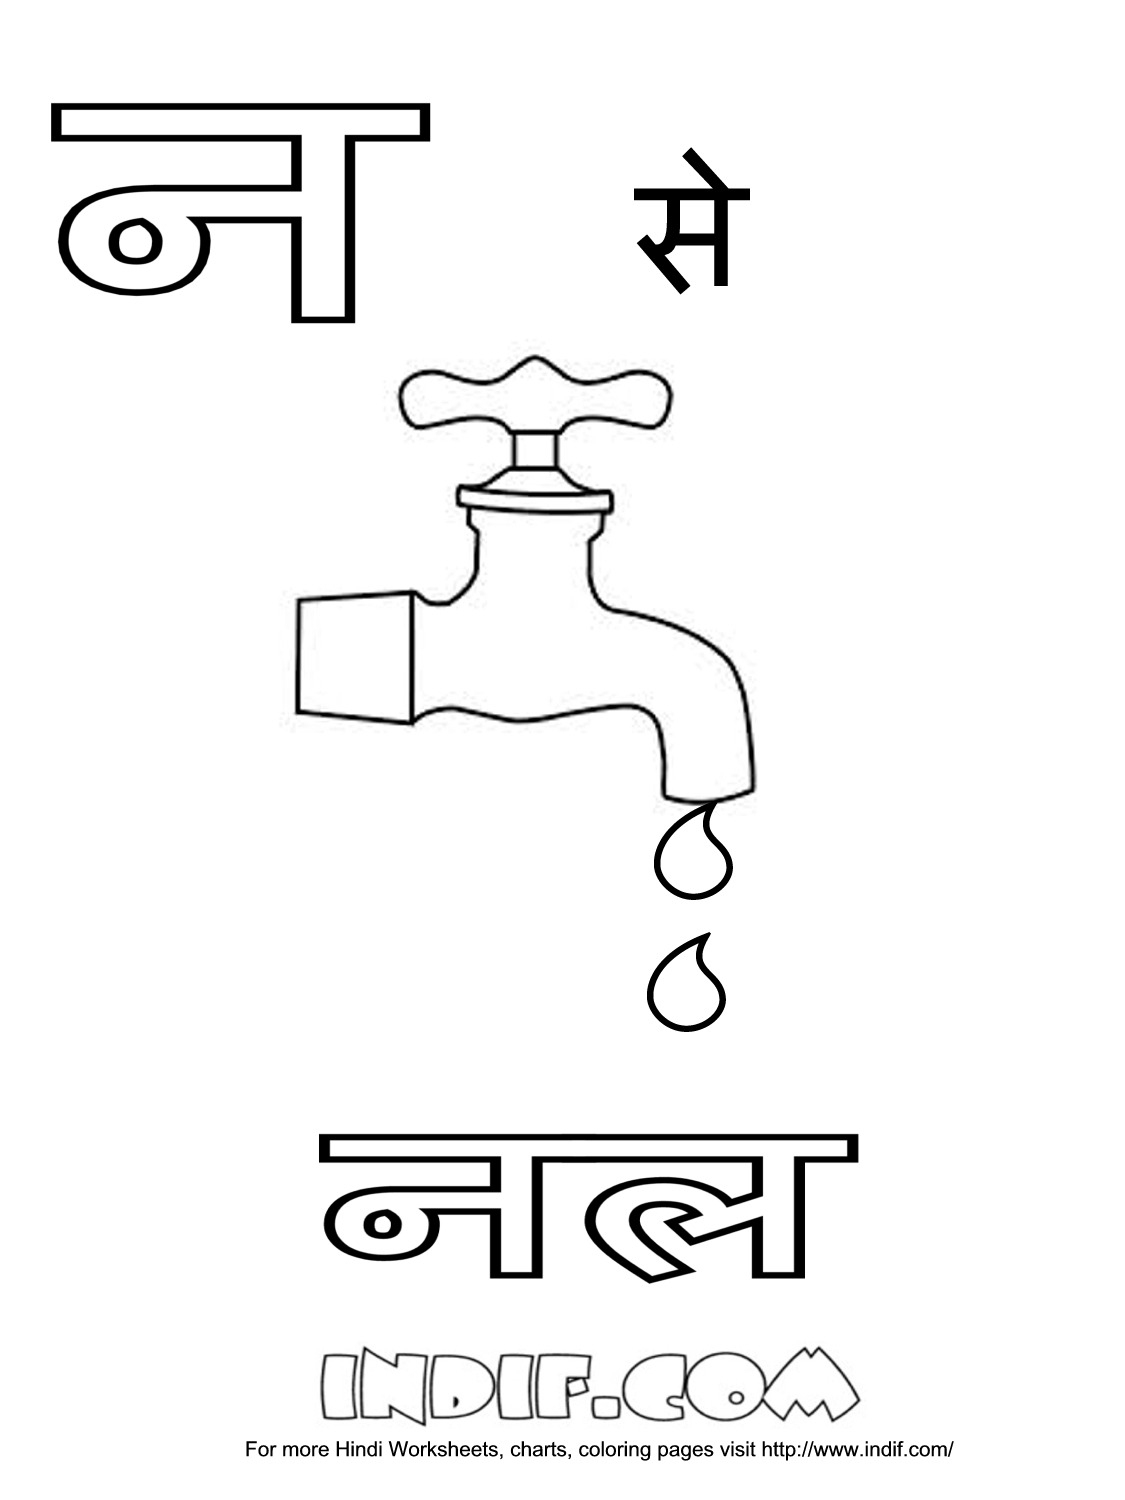 Alphabets Pictures For Colouring – With Letter Worksheets Also | Hindi Writing Worksheets Printable